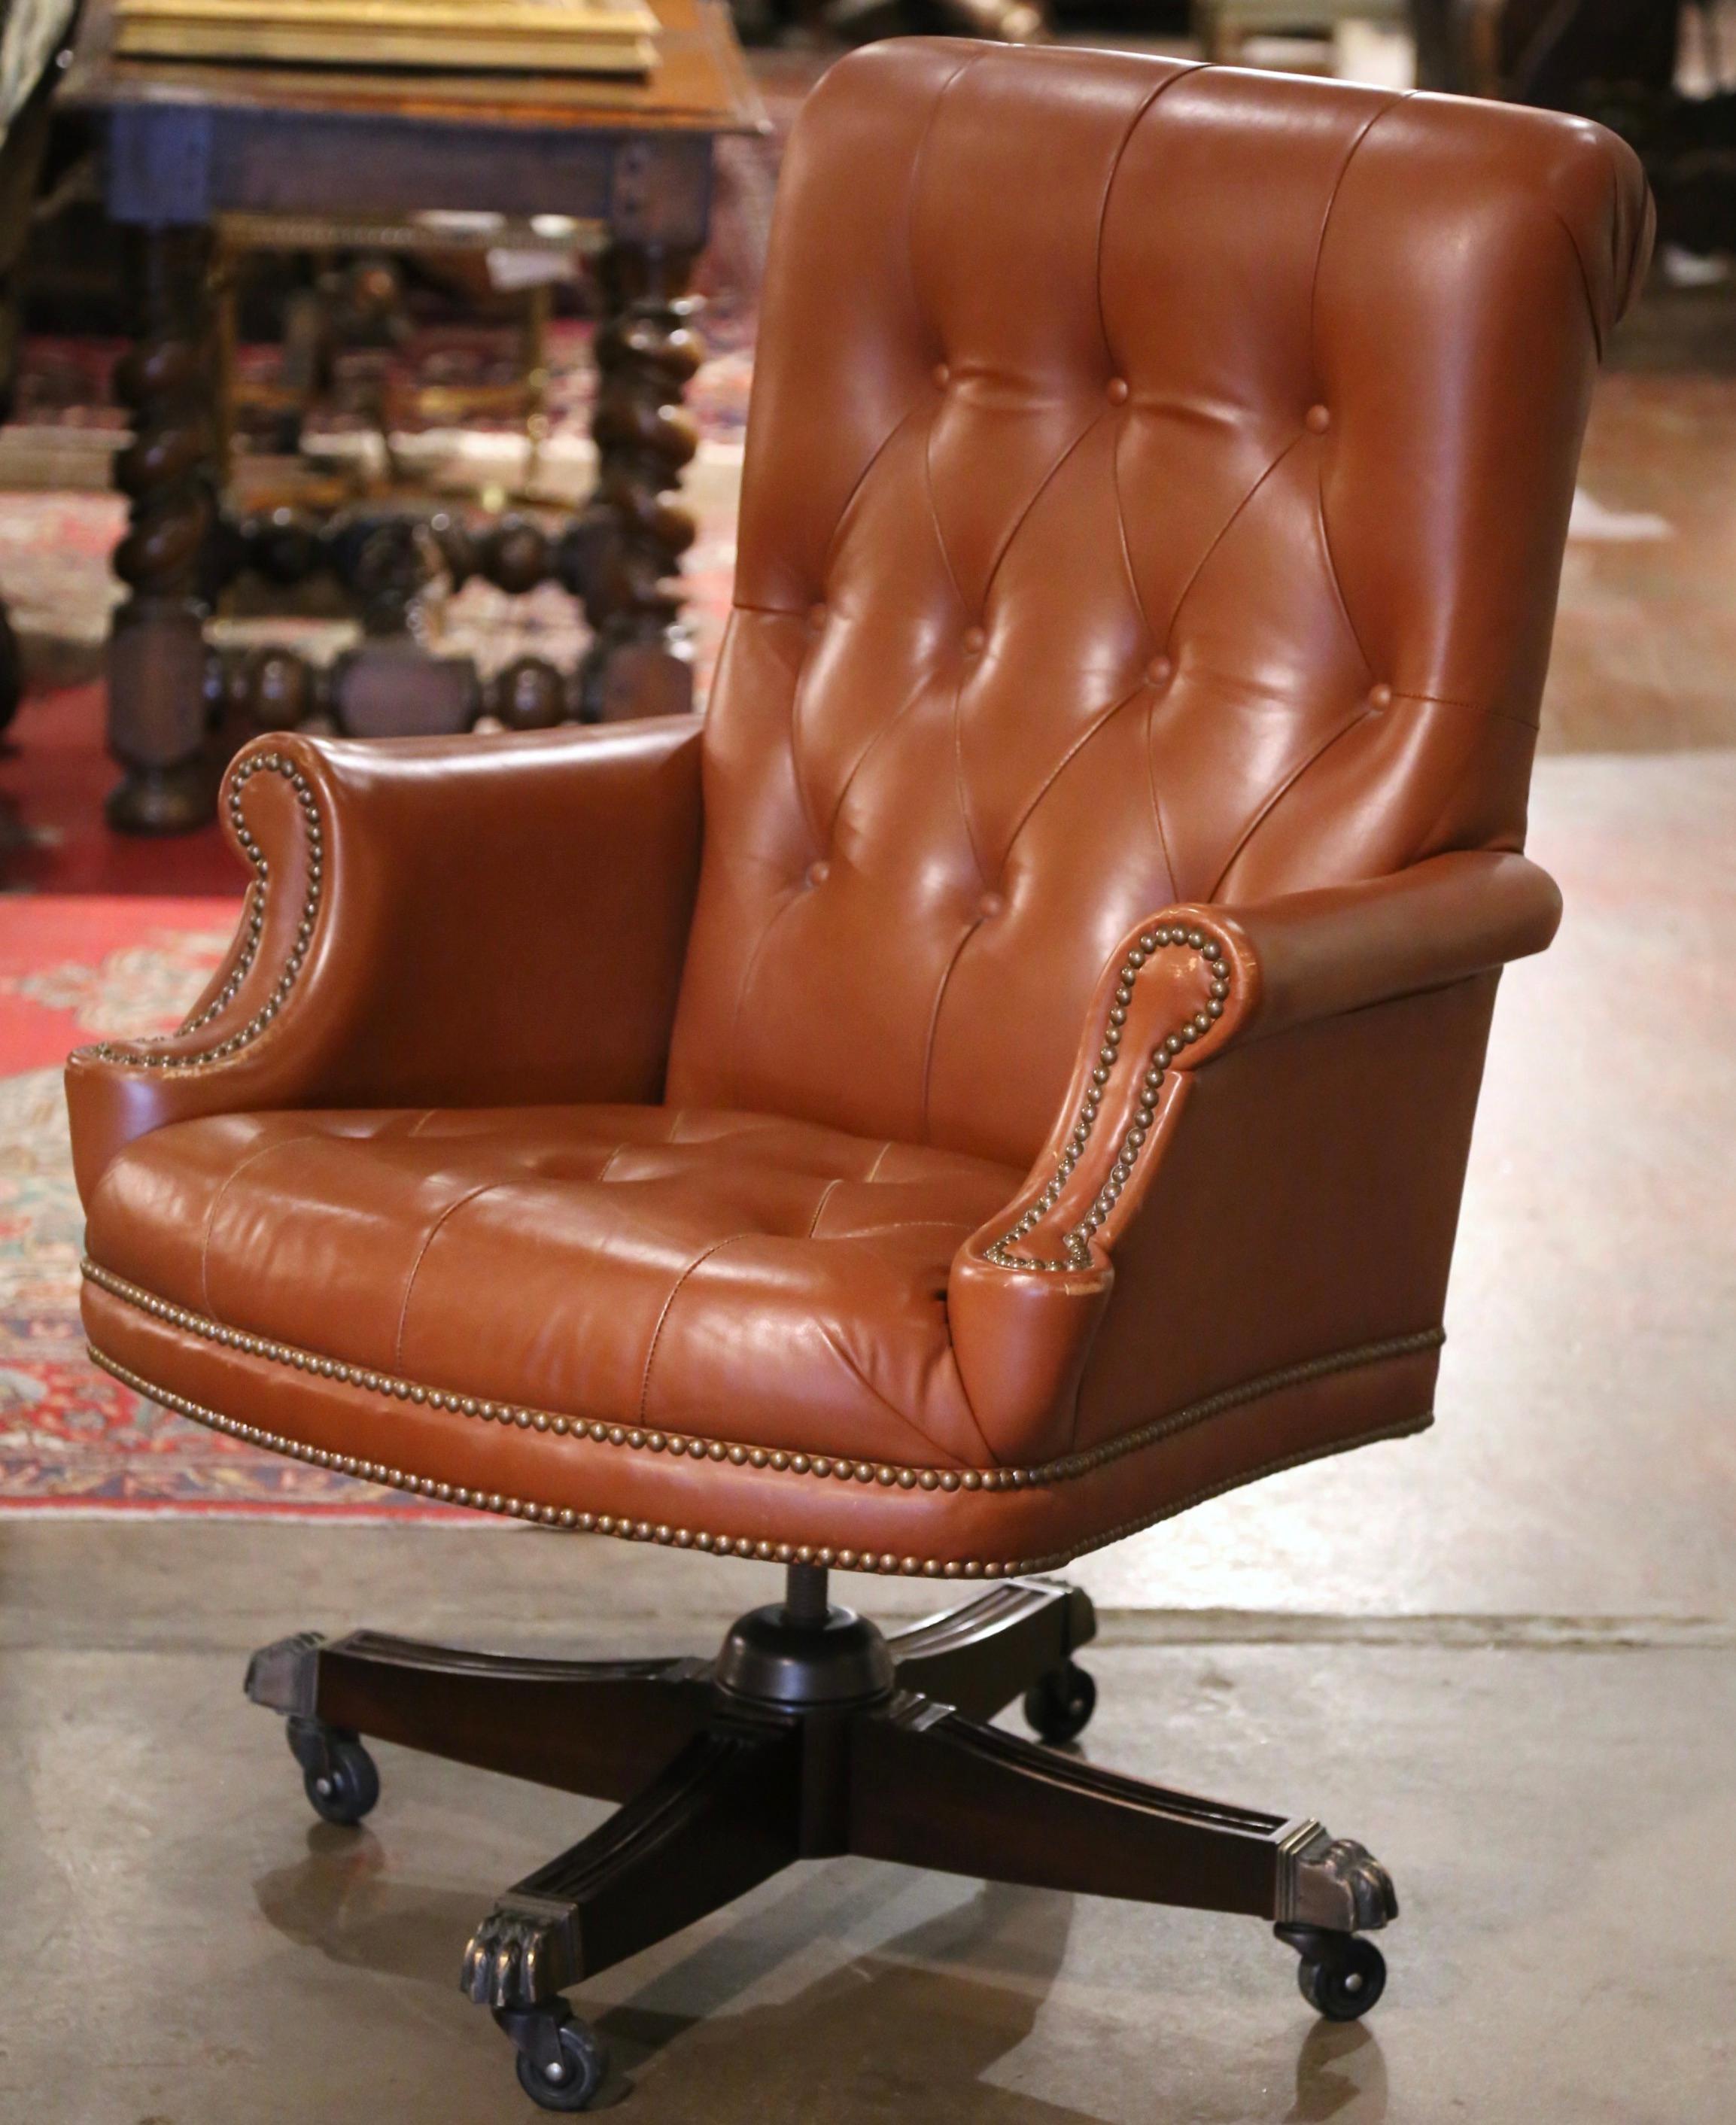 Hand-Crafted Vintage Adjustable and Swivel Executive Office Desk Armchair with Tan Leather